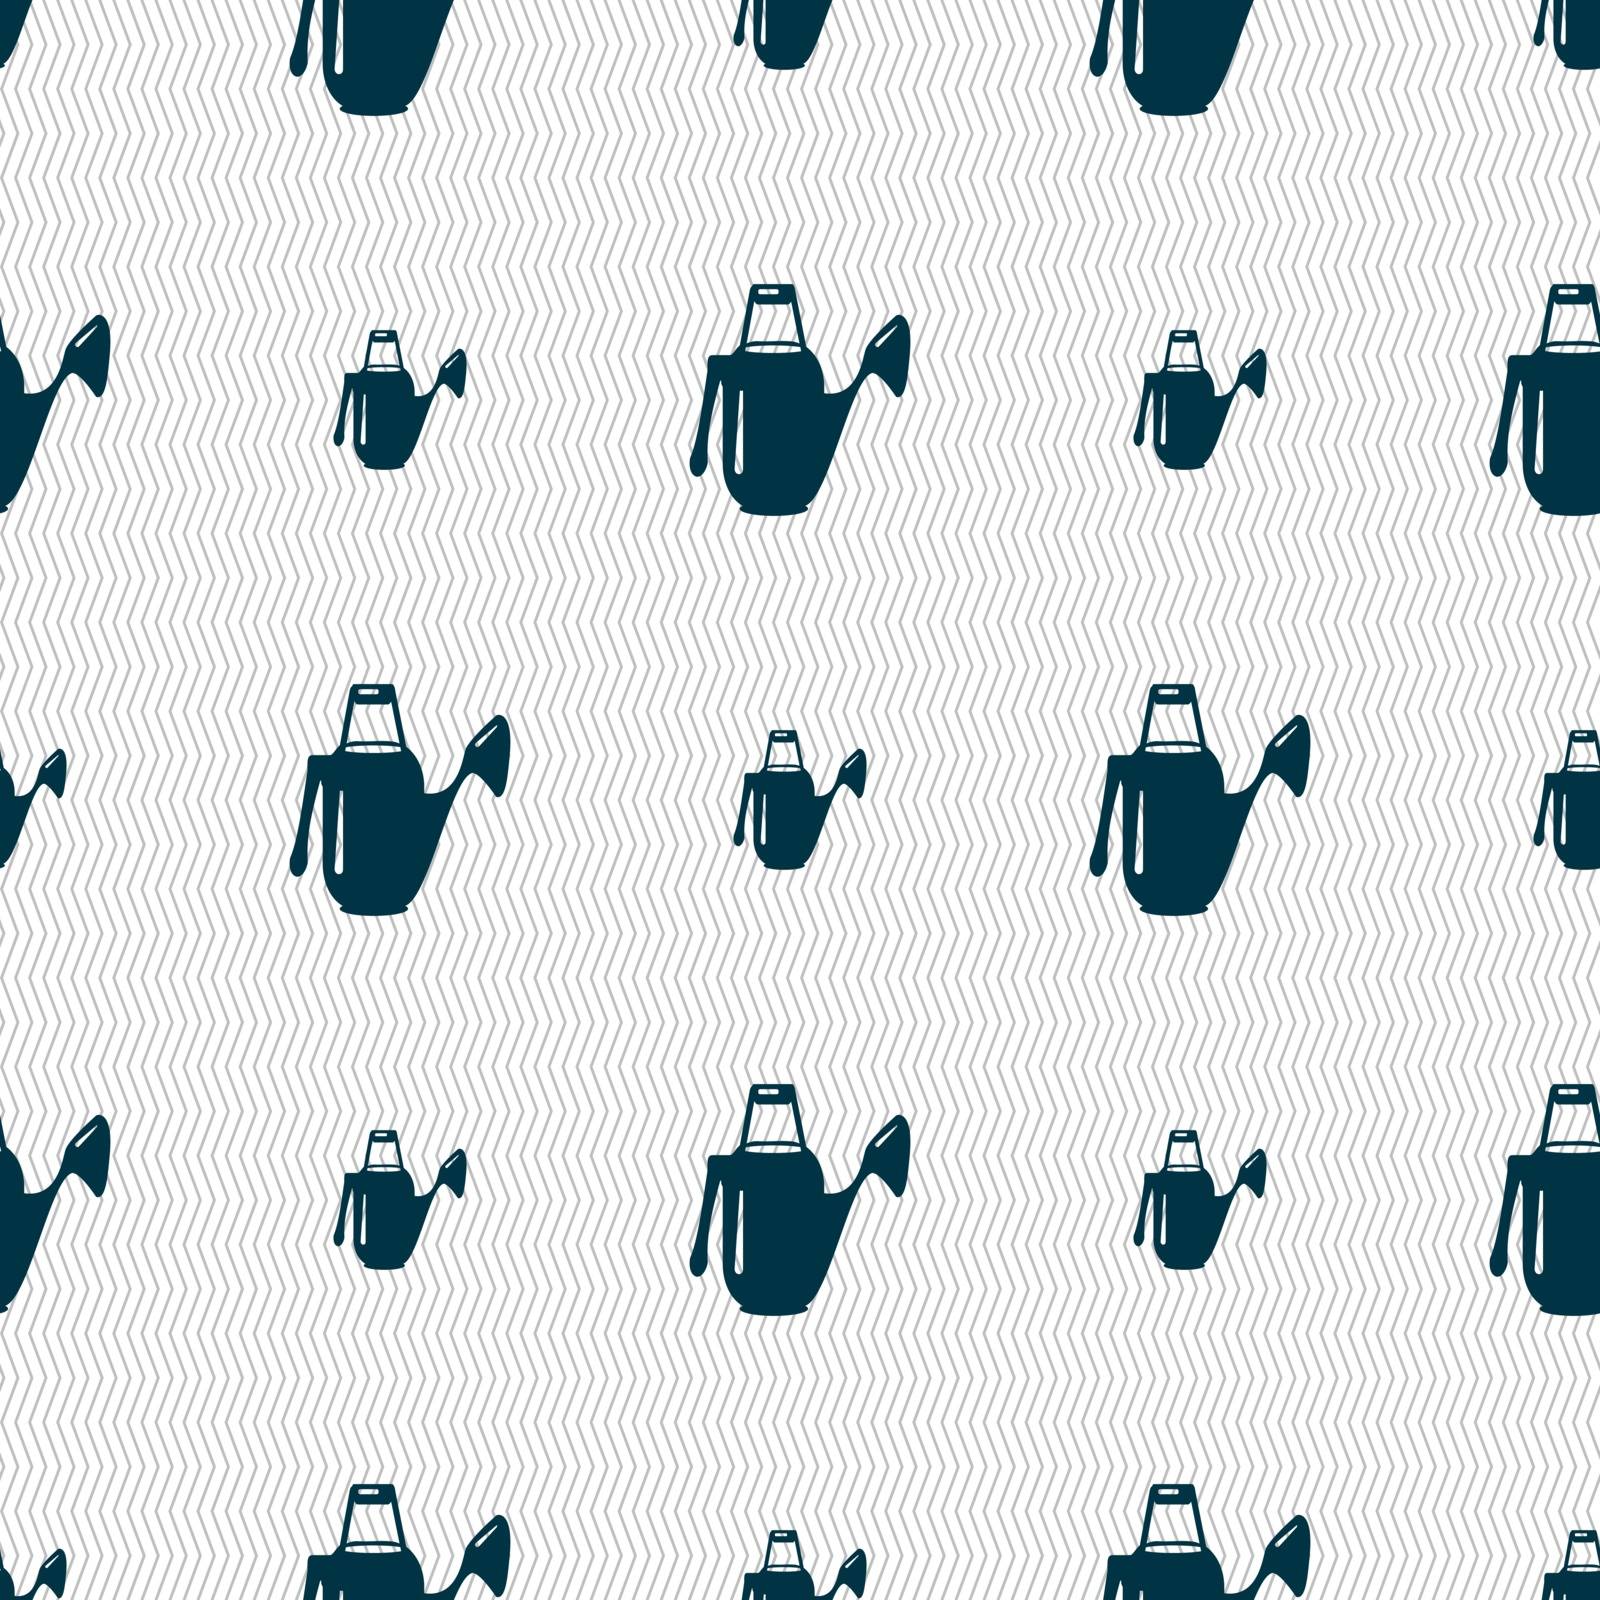 Watering can icon sign. Seamless pattern with geometric texture. Vector illustration